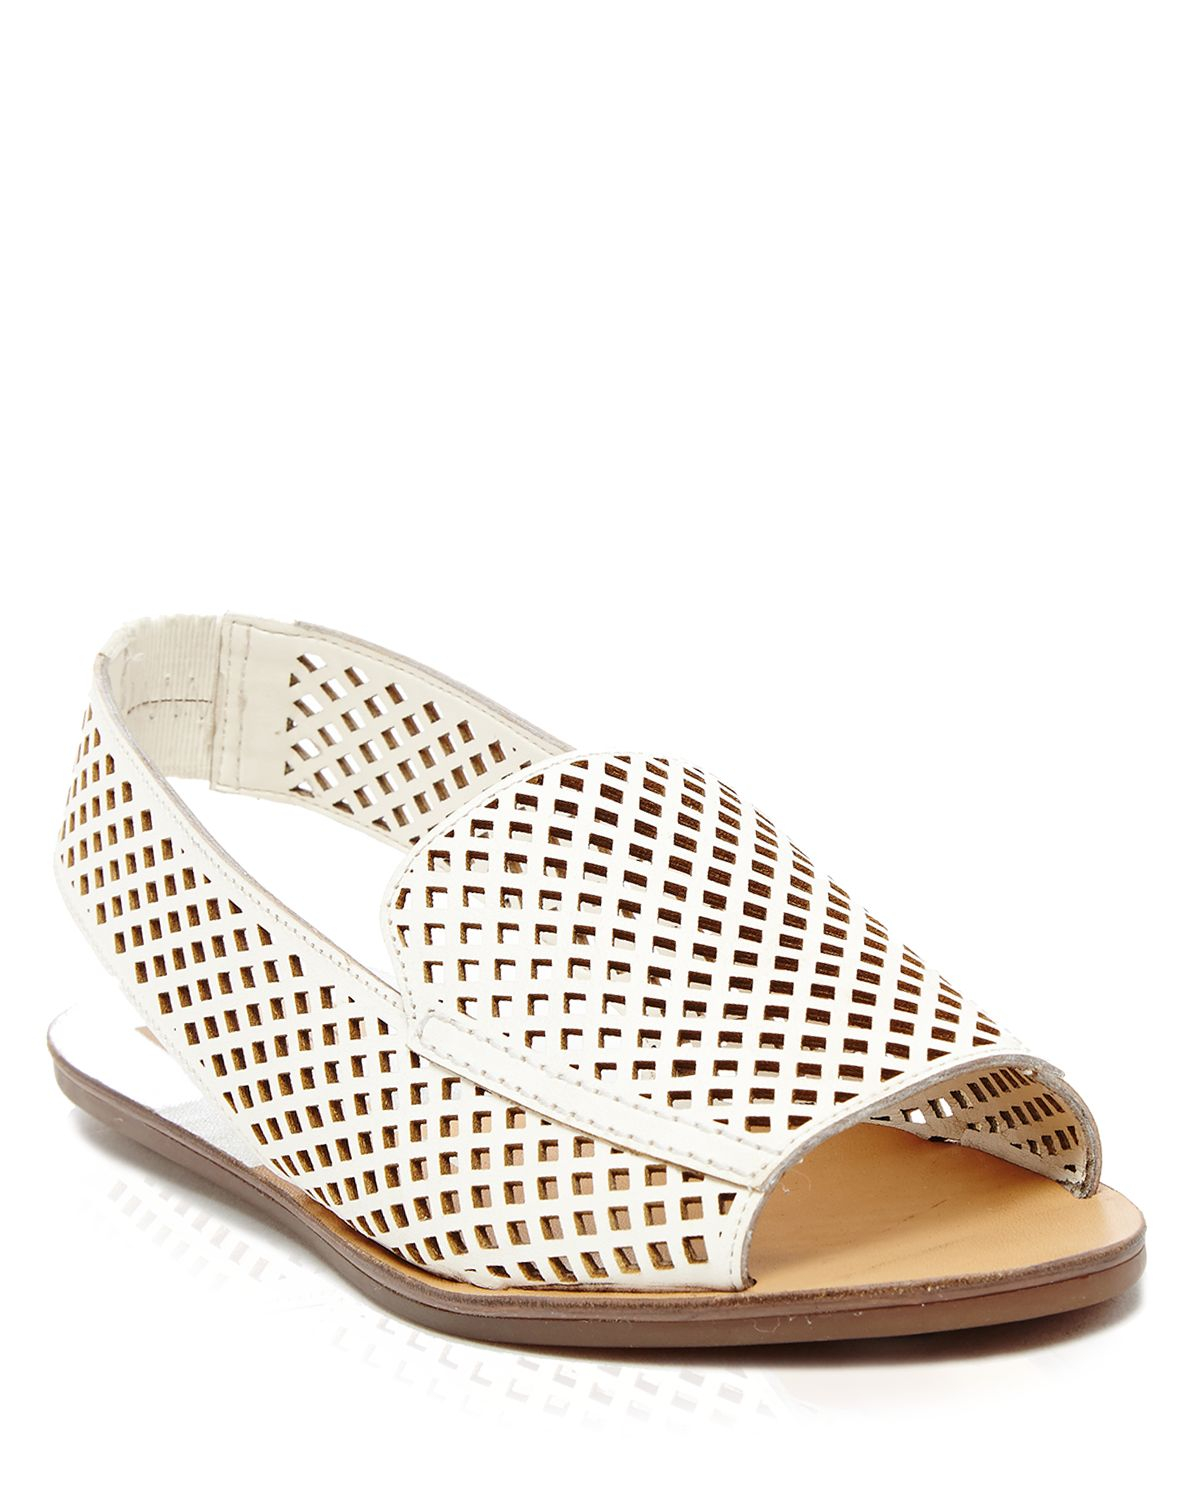 Dolce vita Open Toe Perforated Slingback Flat Sandals - Lisco in White ...